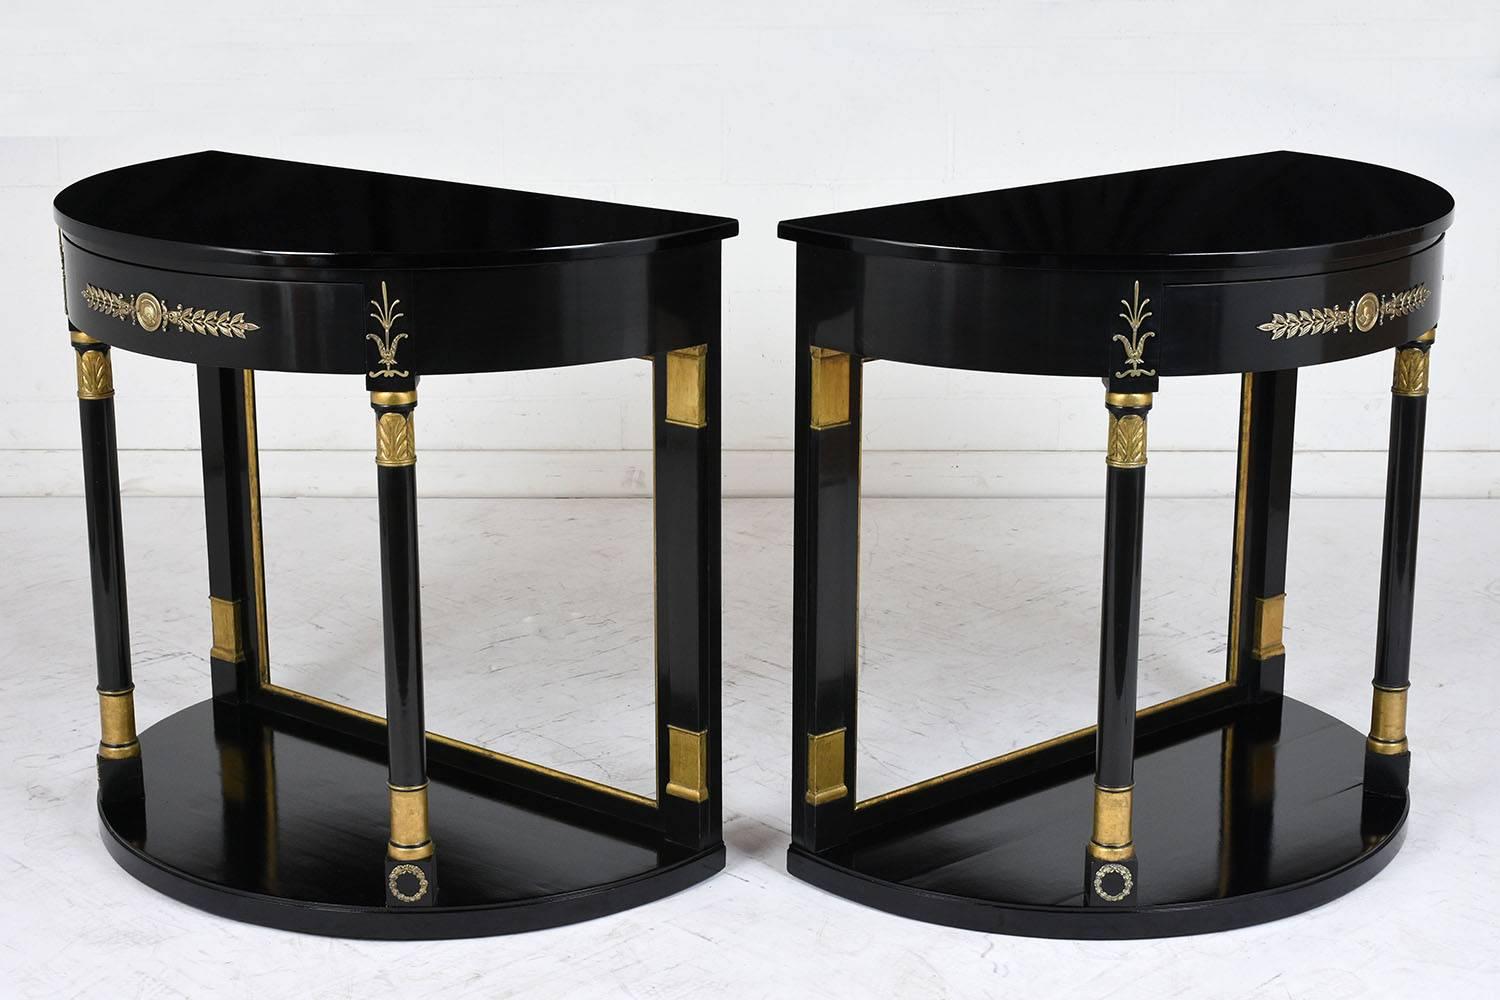 Carved Pair of Empire-Style Ebonized Demi-Lune Console Tables